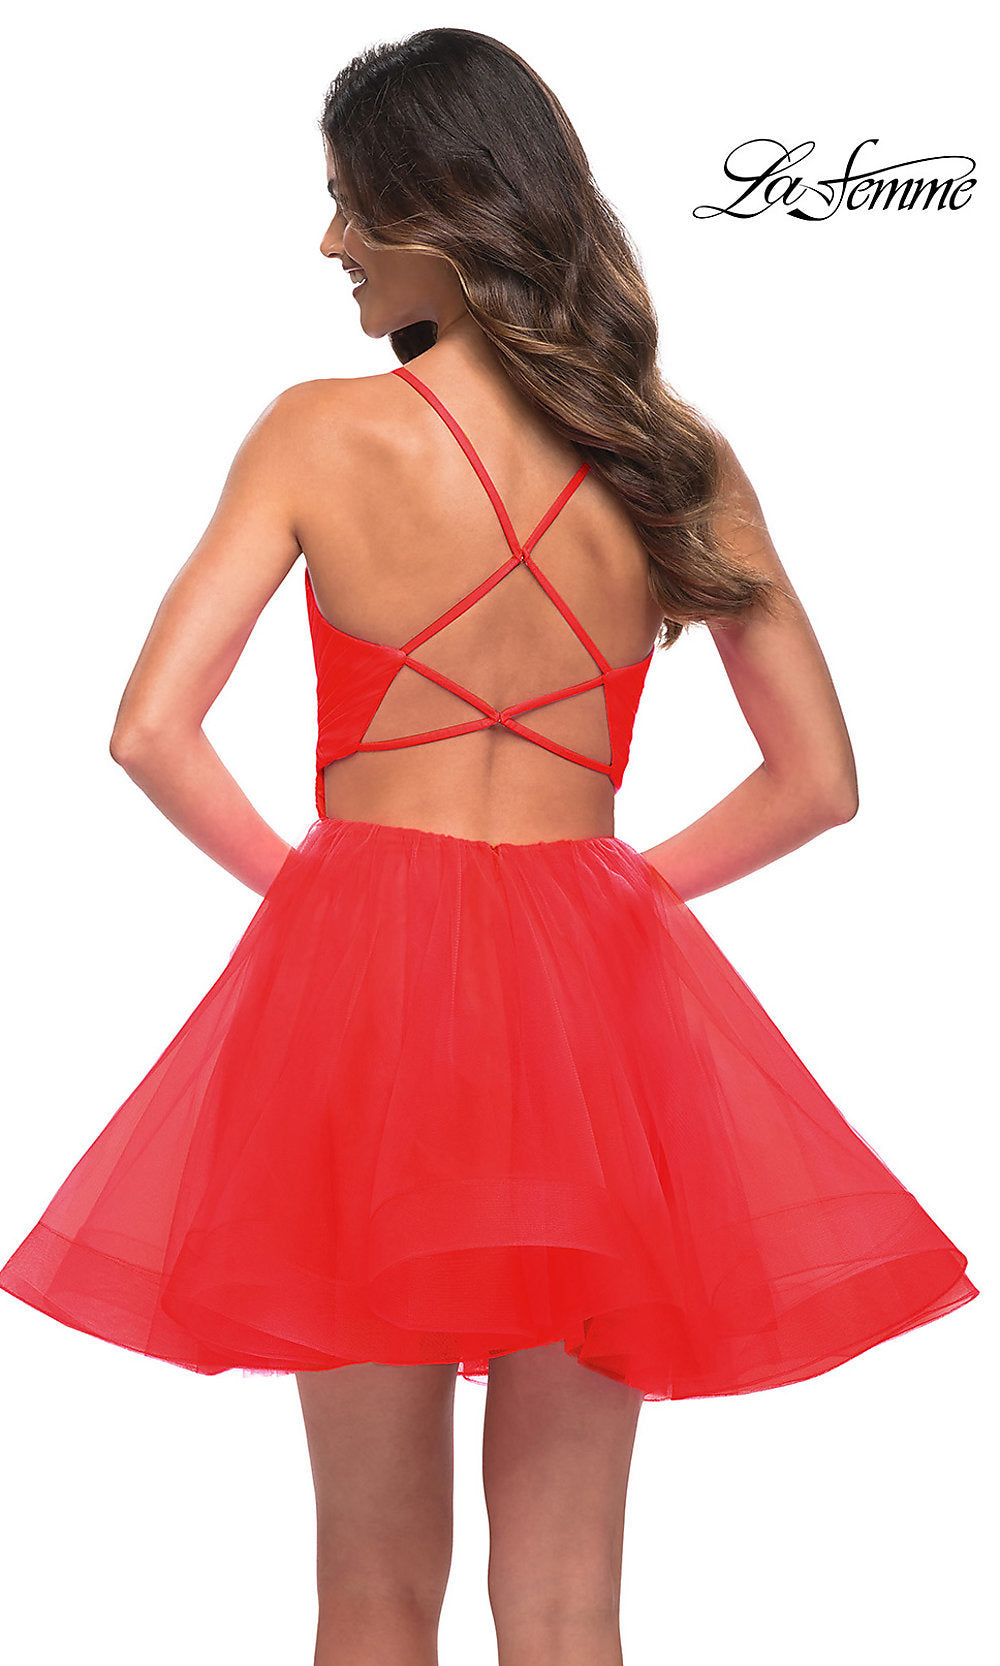  La Femme Short Fit-and-Flare Homecoming Dress